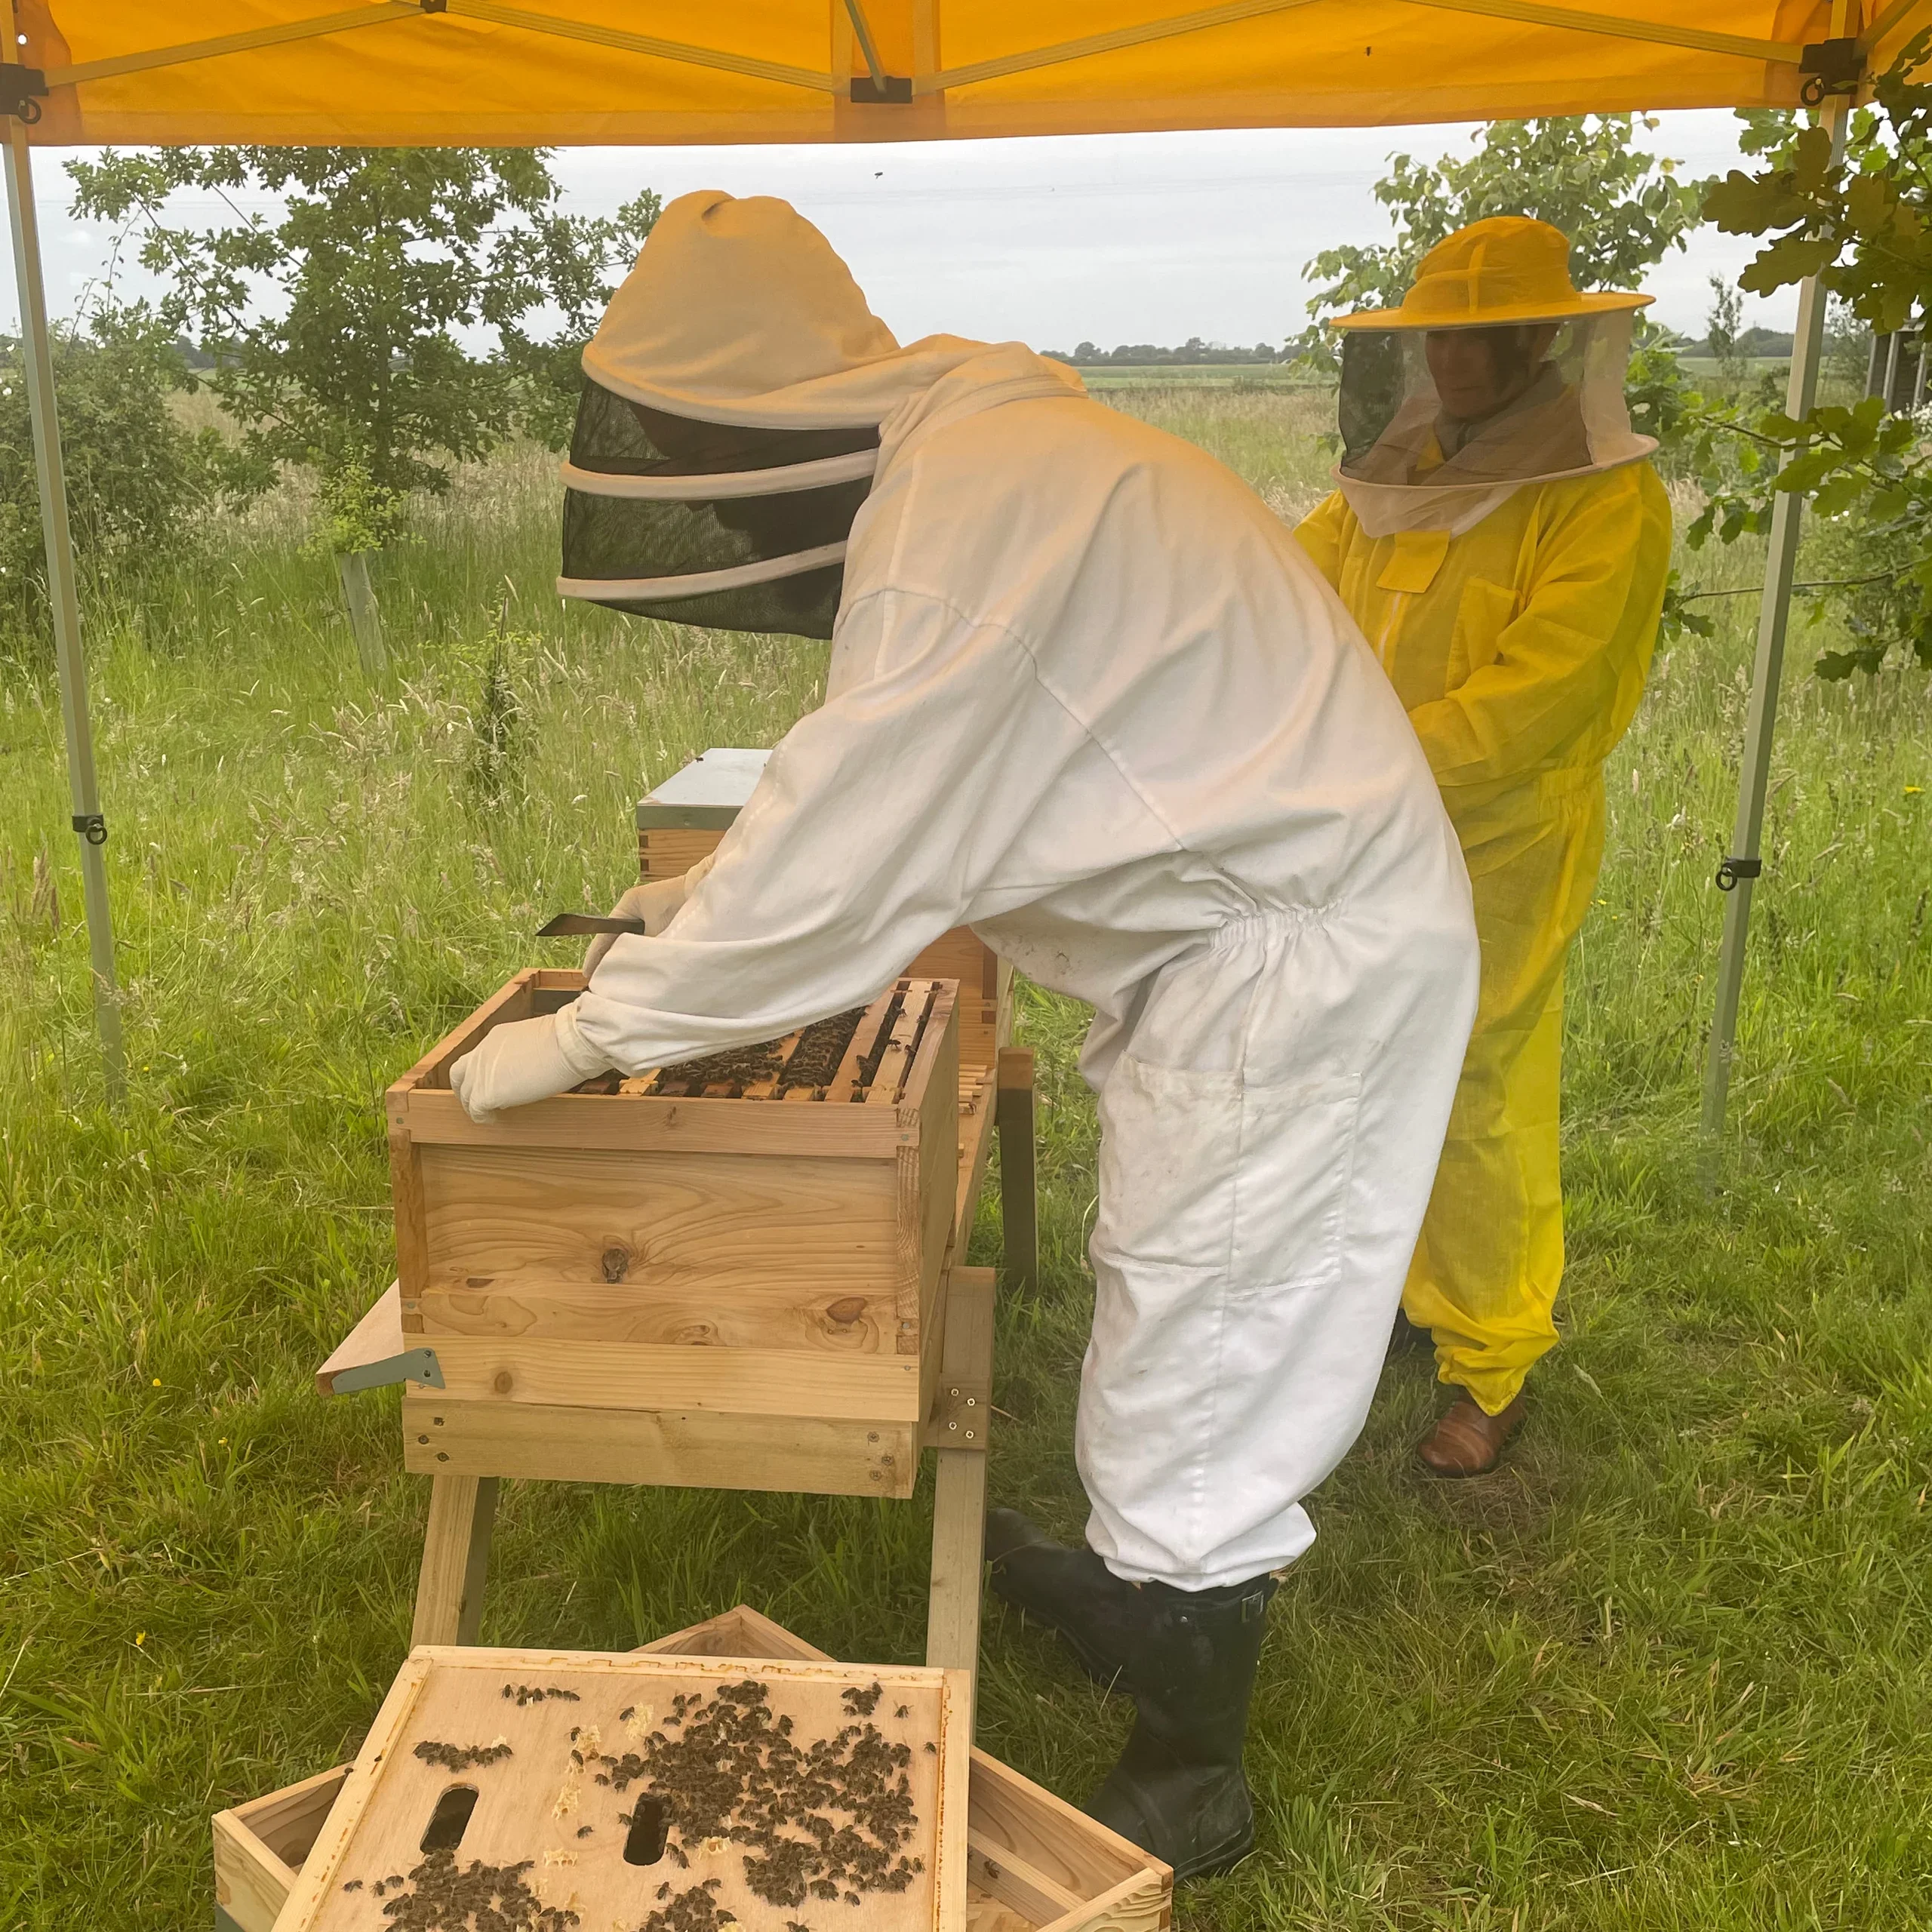 The Bee Experience Workshop